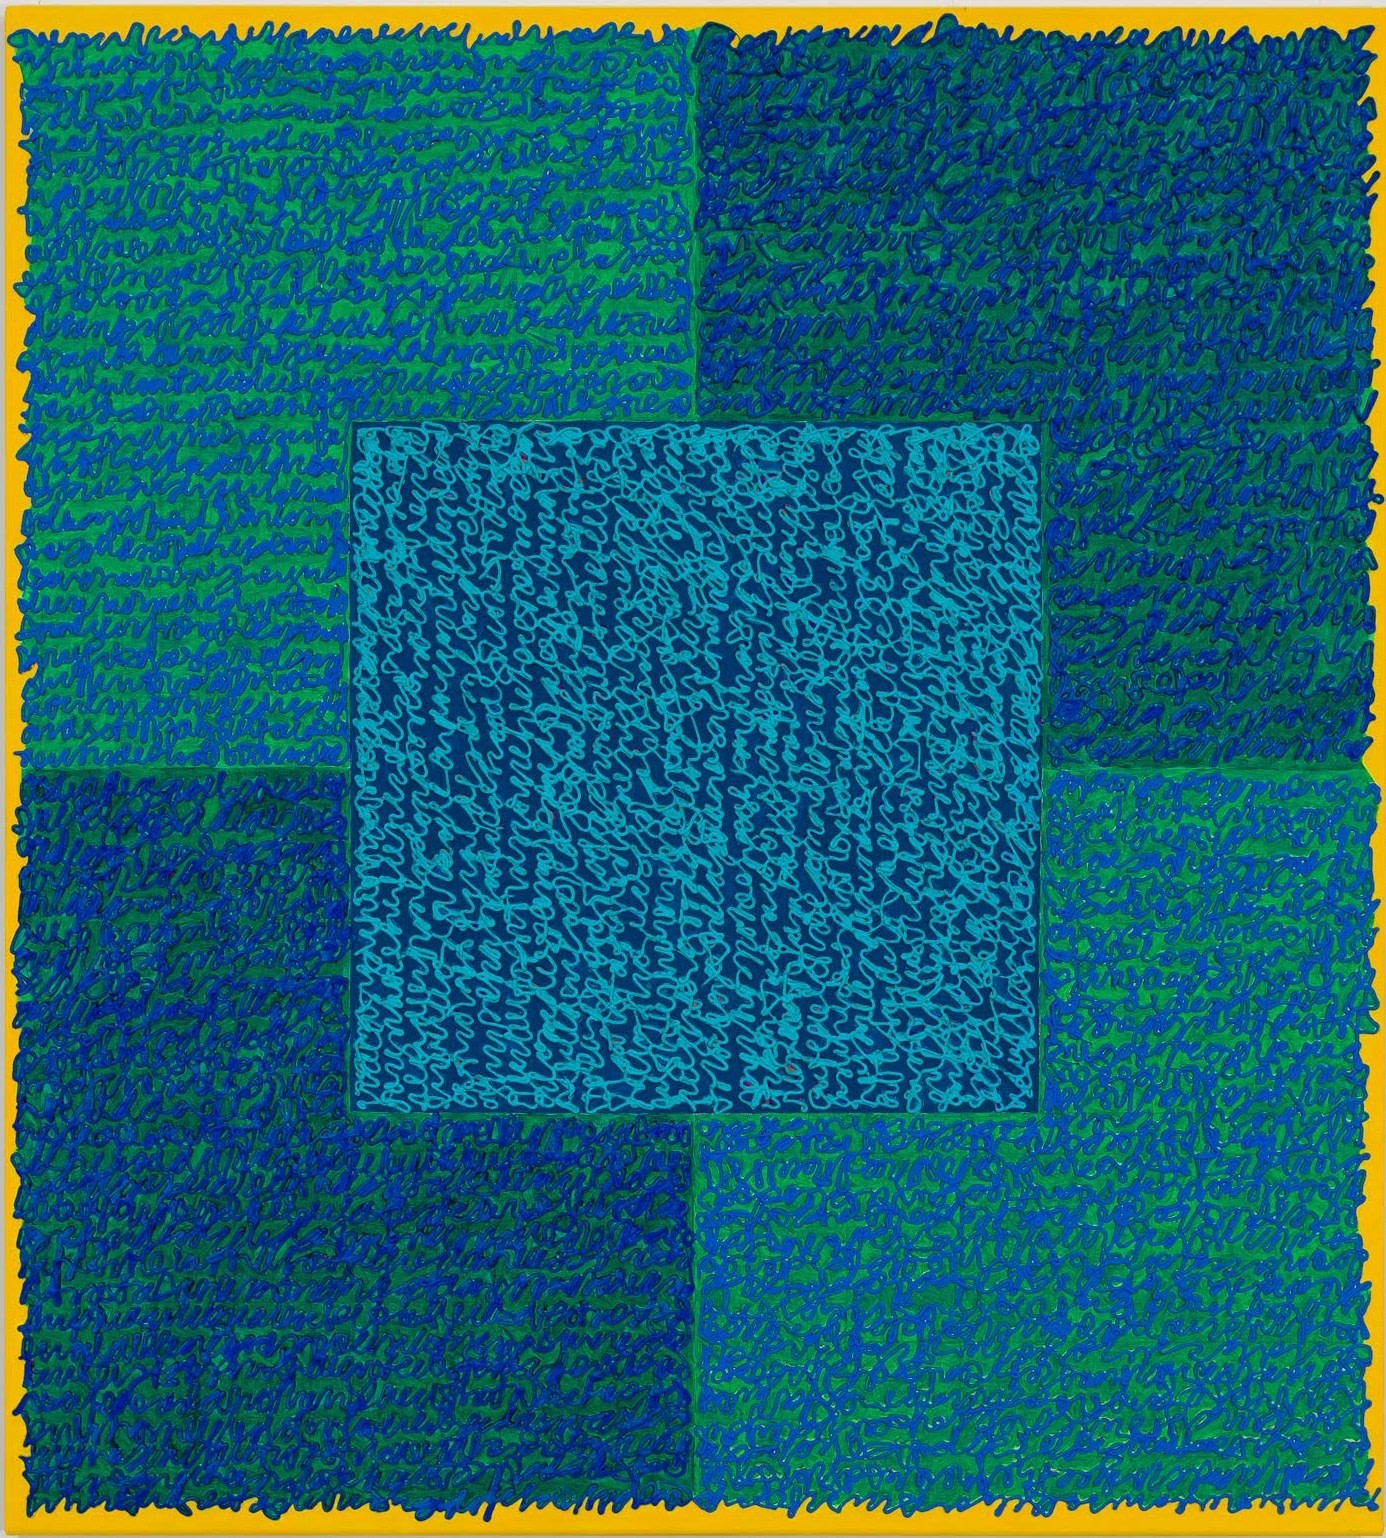 Louise P. Sloane, Fated 7, 2016, Acrylic paint and pastes on aluminum panel, 40 x 36 inches, signed, titled and dated on the verso, four rectangles and a central square (teal, blue, and yellow edges) with personal text written over the squares in blue to create three dimensional texture. Louise P. Sloane has been creating abstract paintings since 1974.